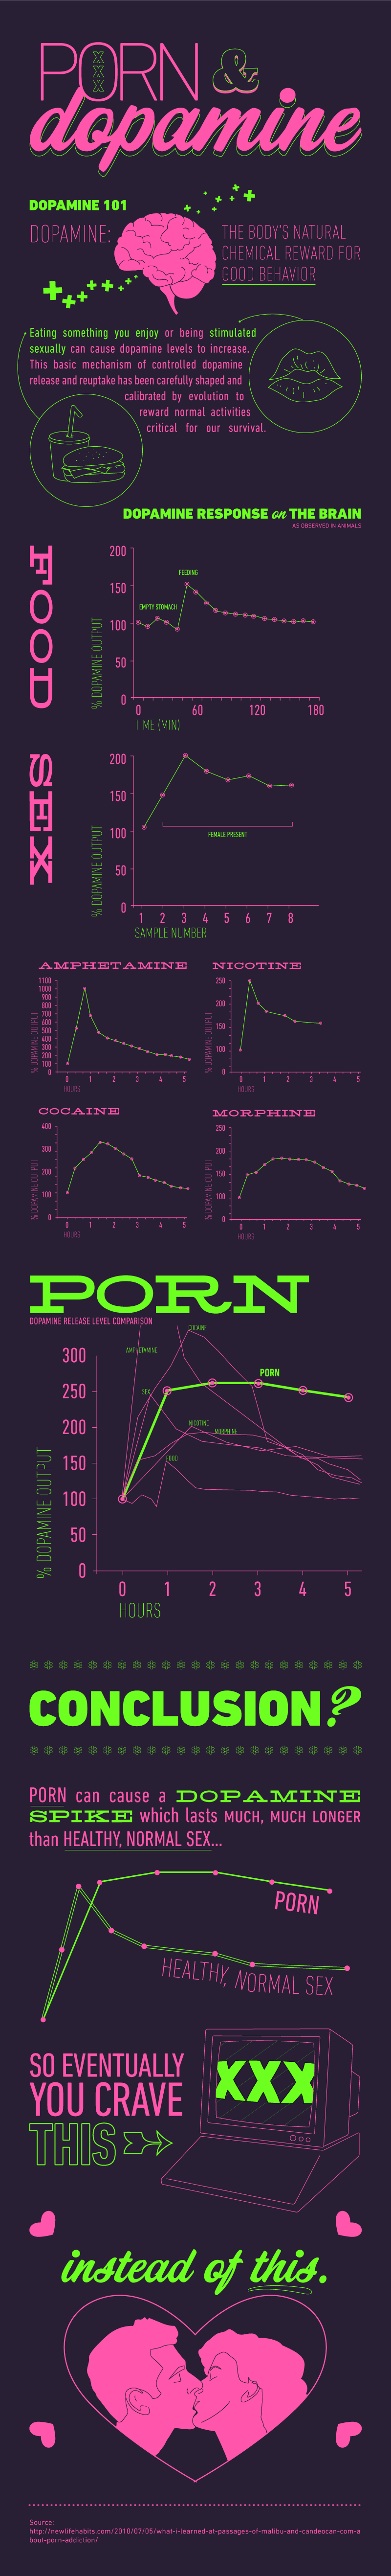 Porn Effects on Dopamine Levels